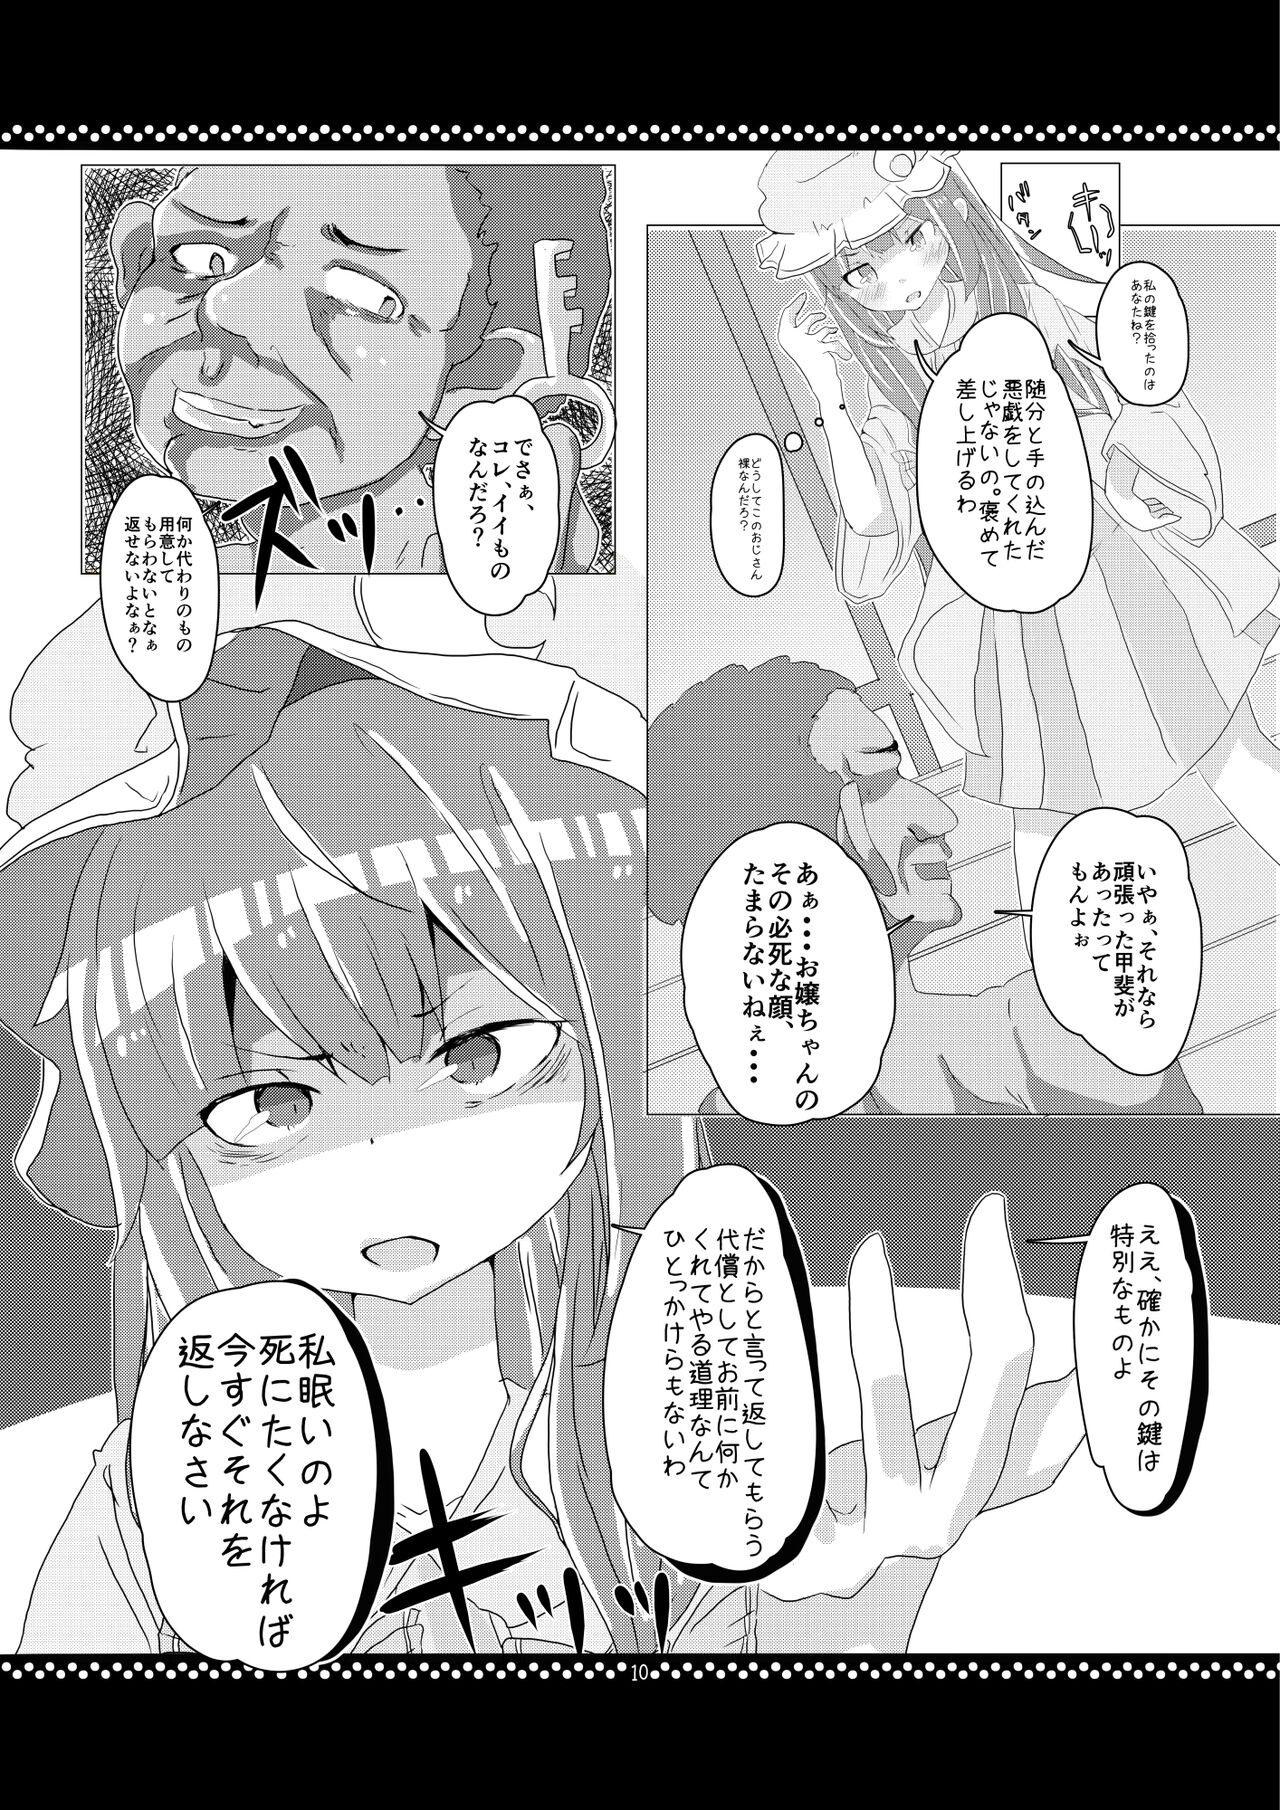 Hairy Pussy 従順？パチュリーさま！ - Touhou project Hair - Page 9